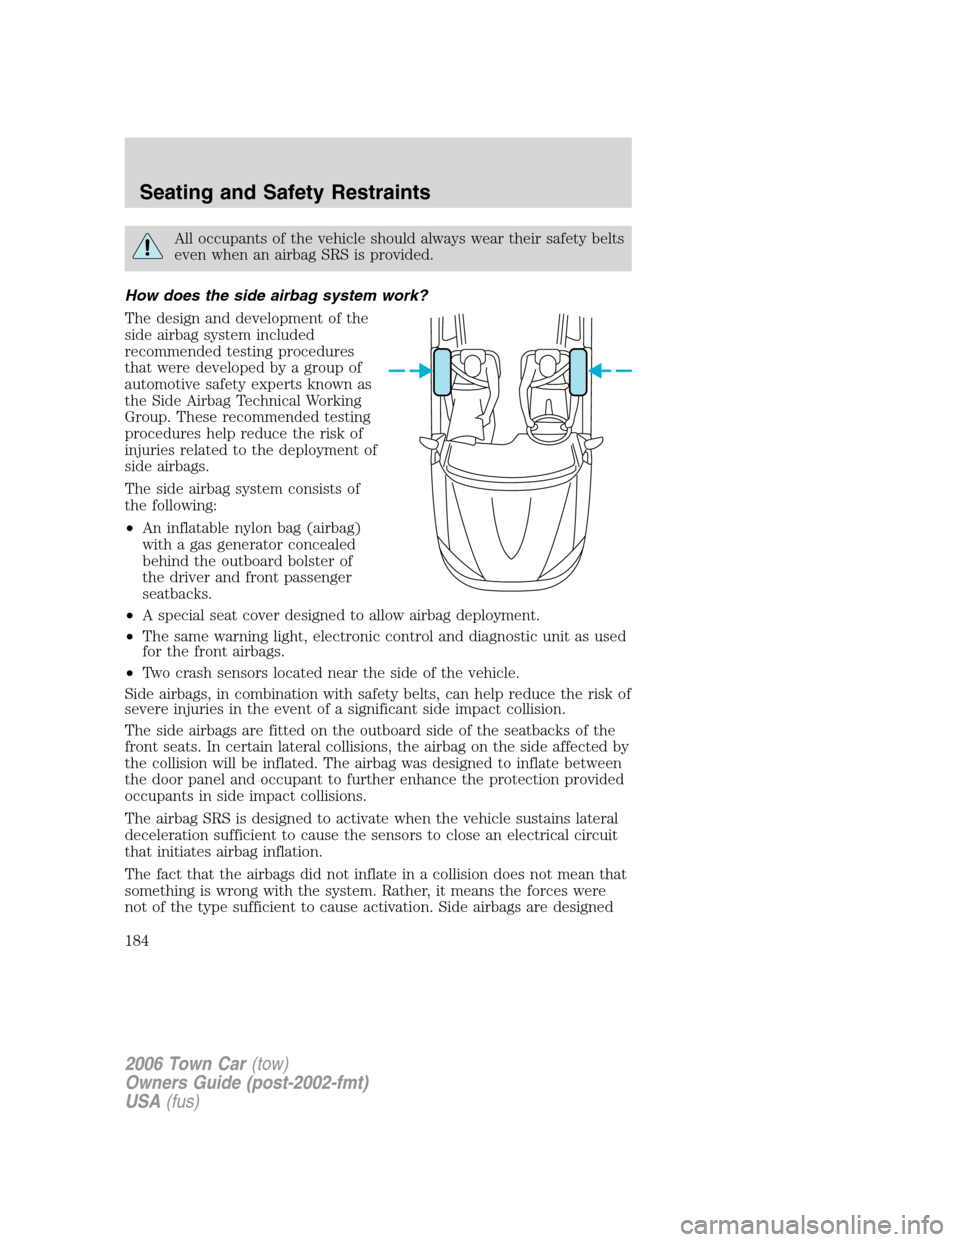 LINCOLN TOWN CAR 2006  Owners Manual All occupants of the vehicle should always wear their safety belts
even when an airbag SRS is provided.
How does the side airbag system work?
The design and development of the
side airbag system inclu